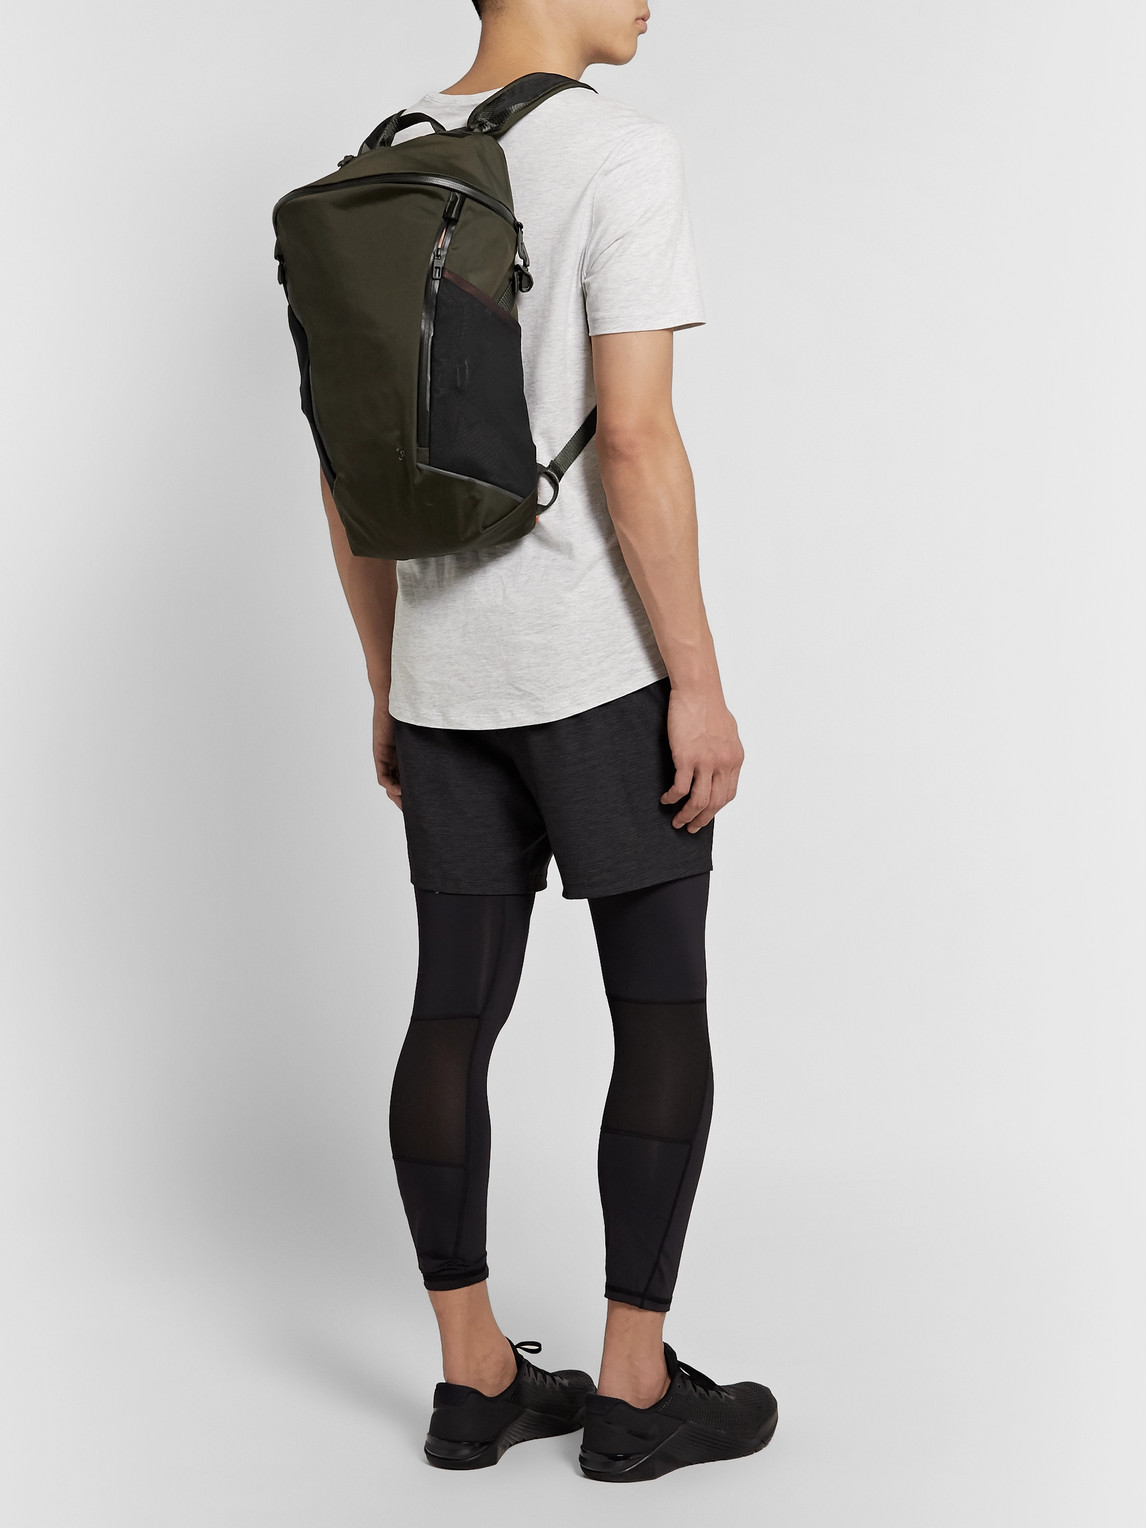 Lululemon More Miles Active Canvas Backpack In Green   ModeSens